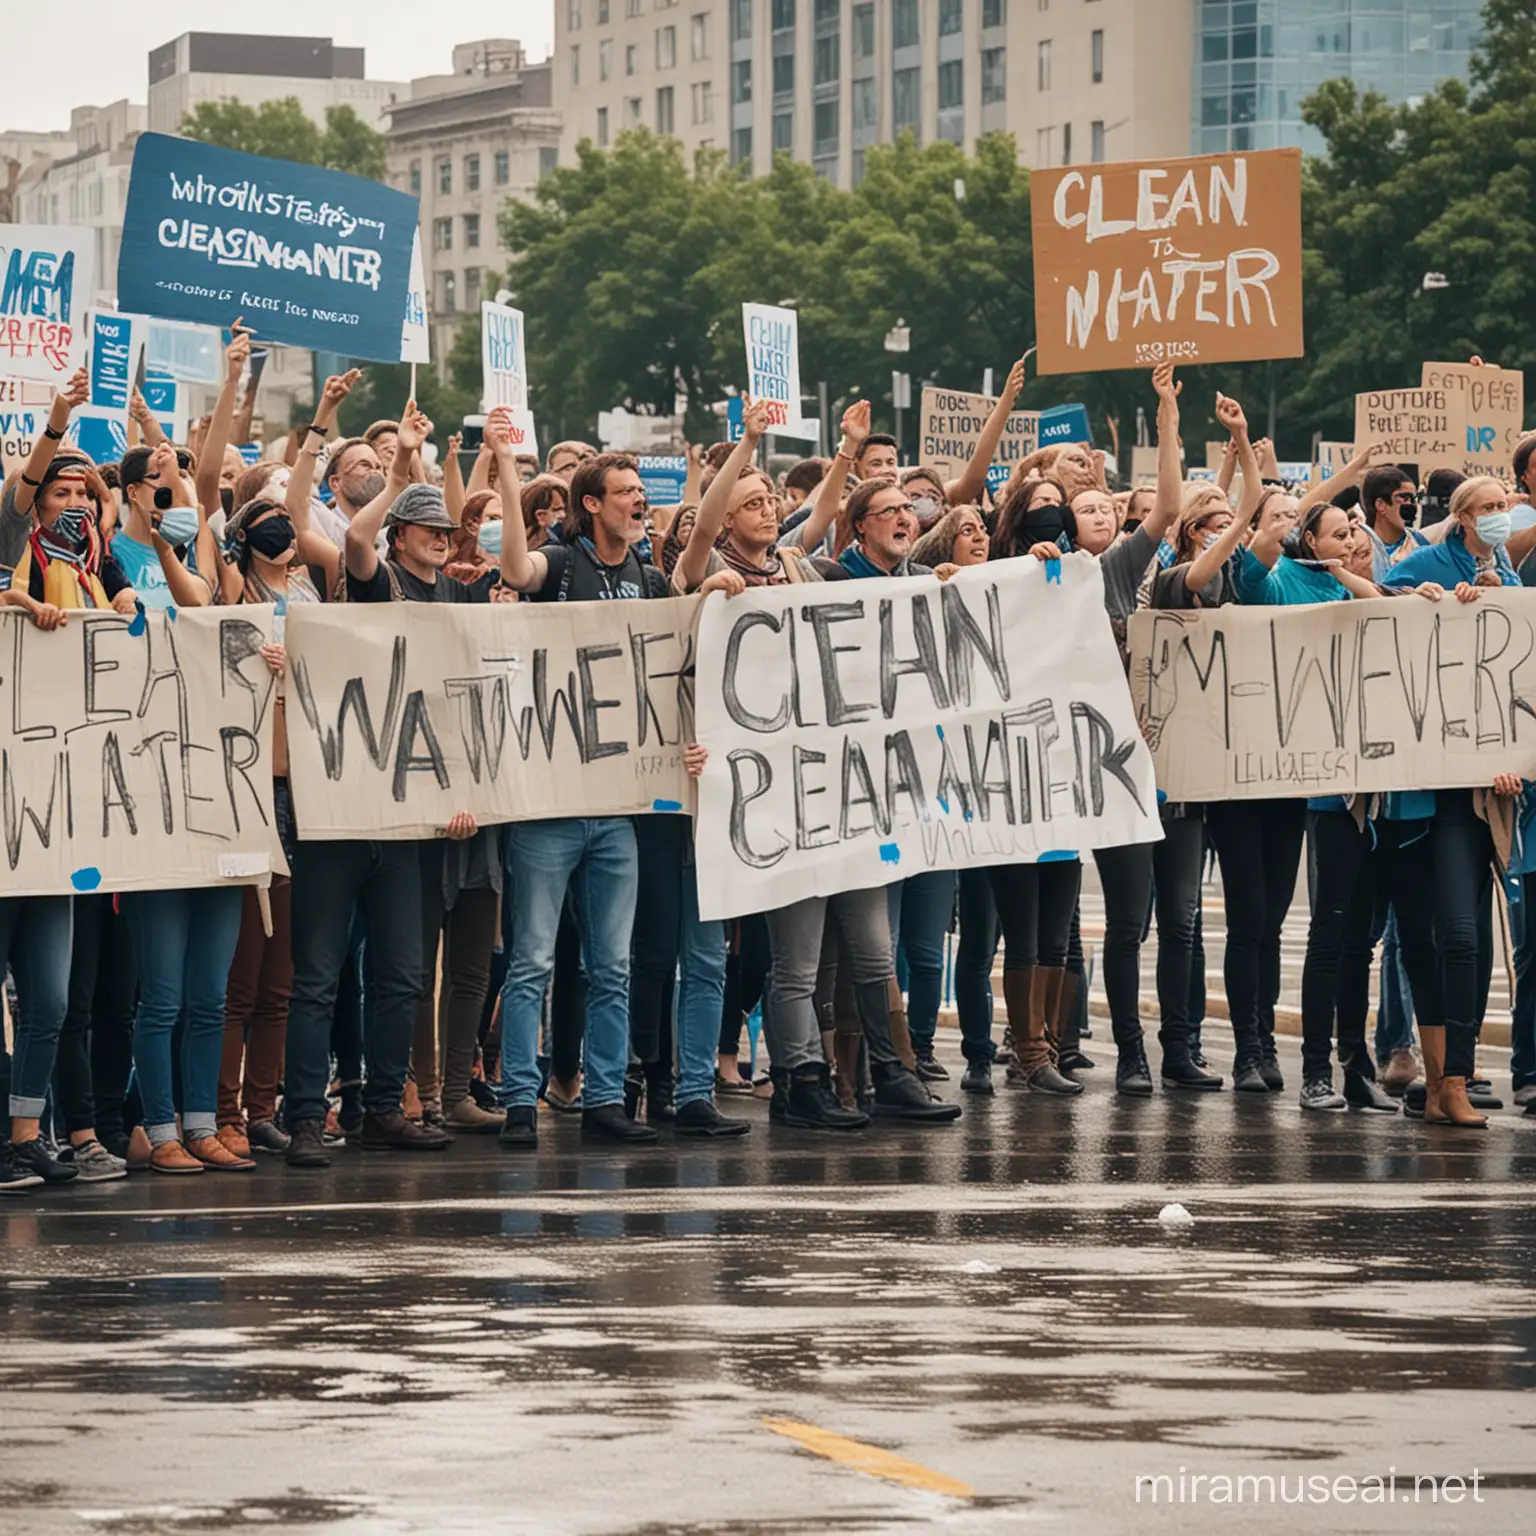 Protesters Advocating for Clean Water Rights